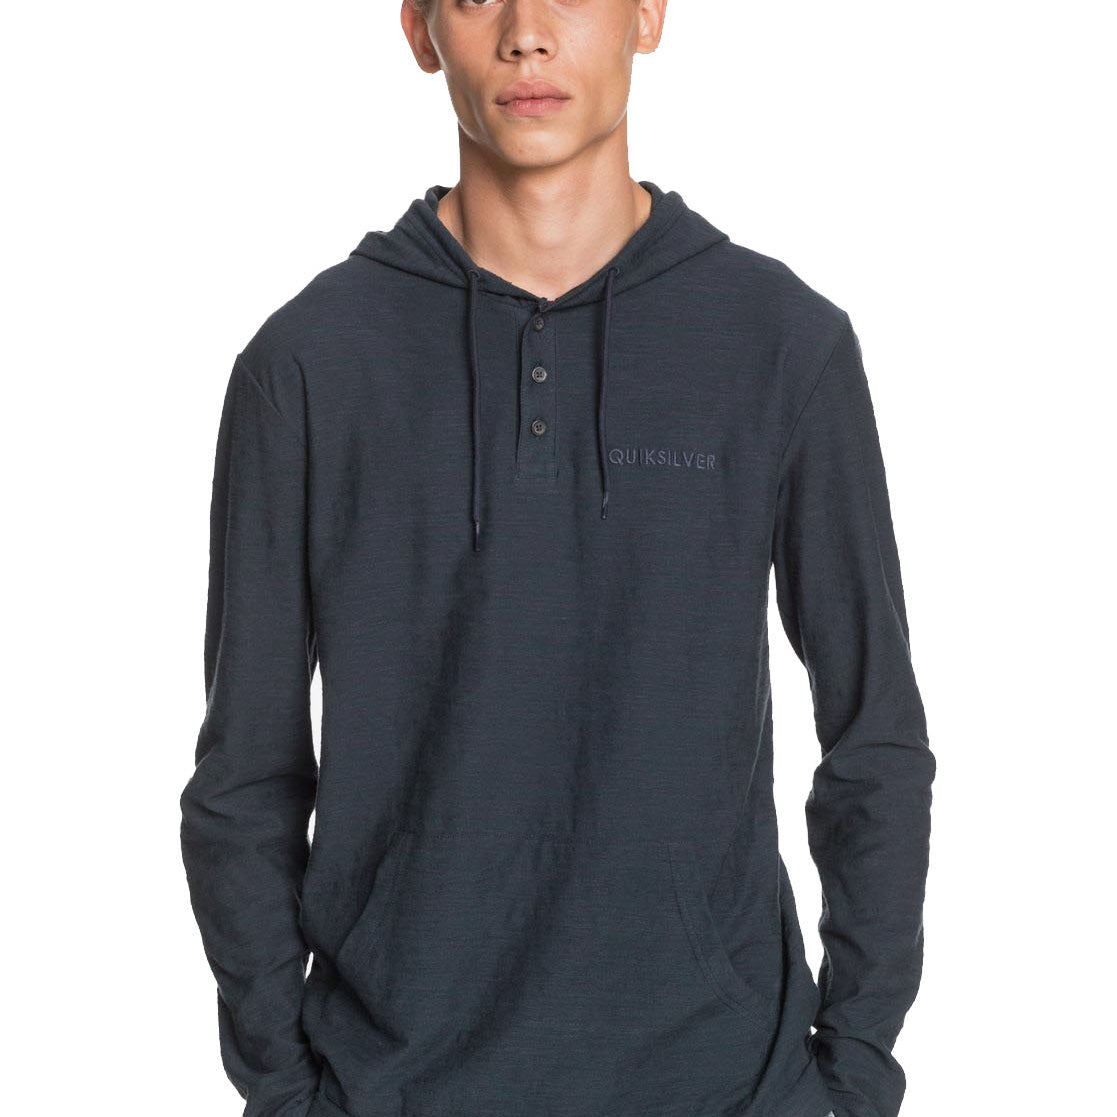 Quiksilver Kentin Long Sleeve Hooded Top BYP3 S